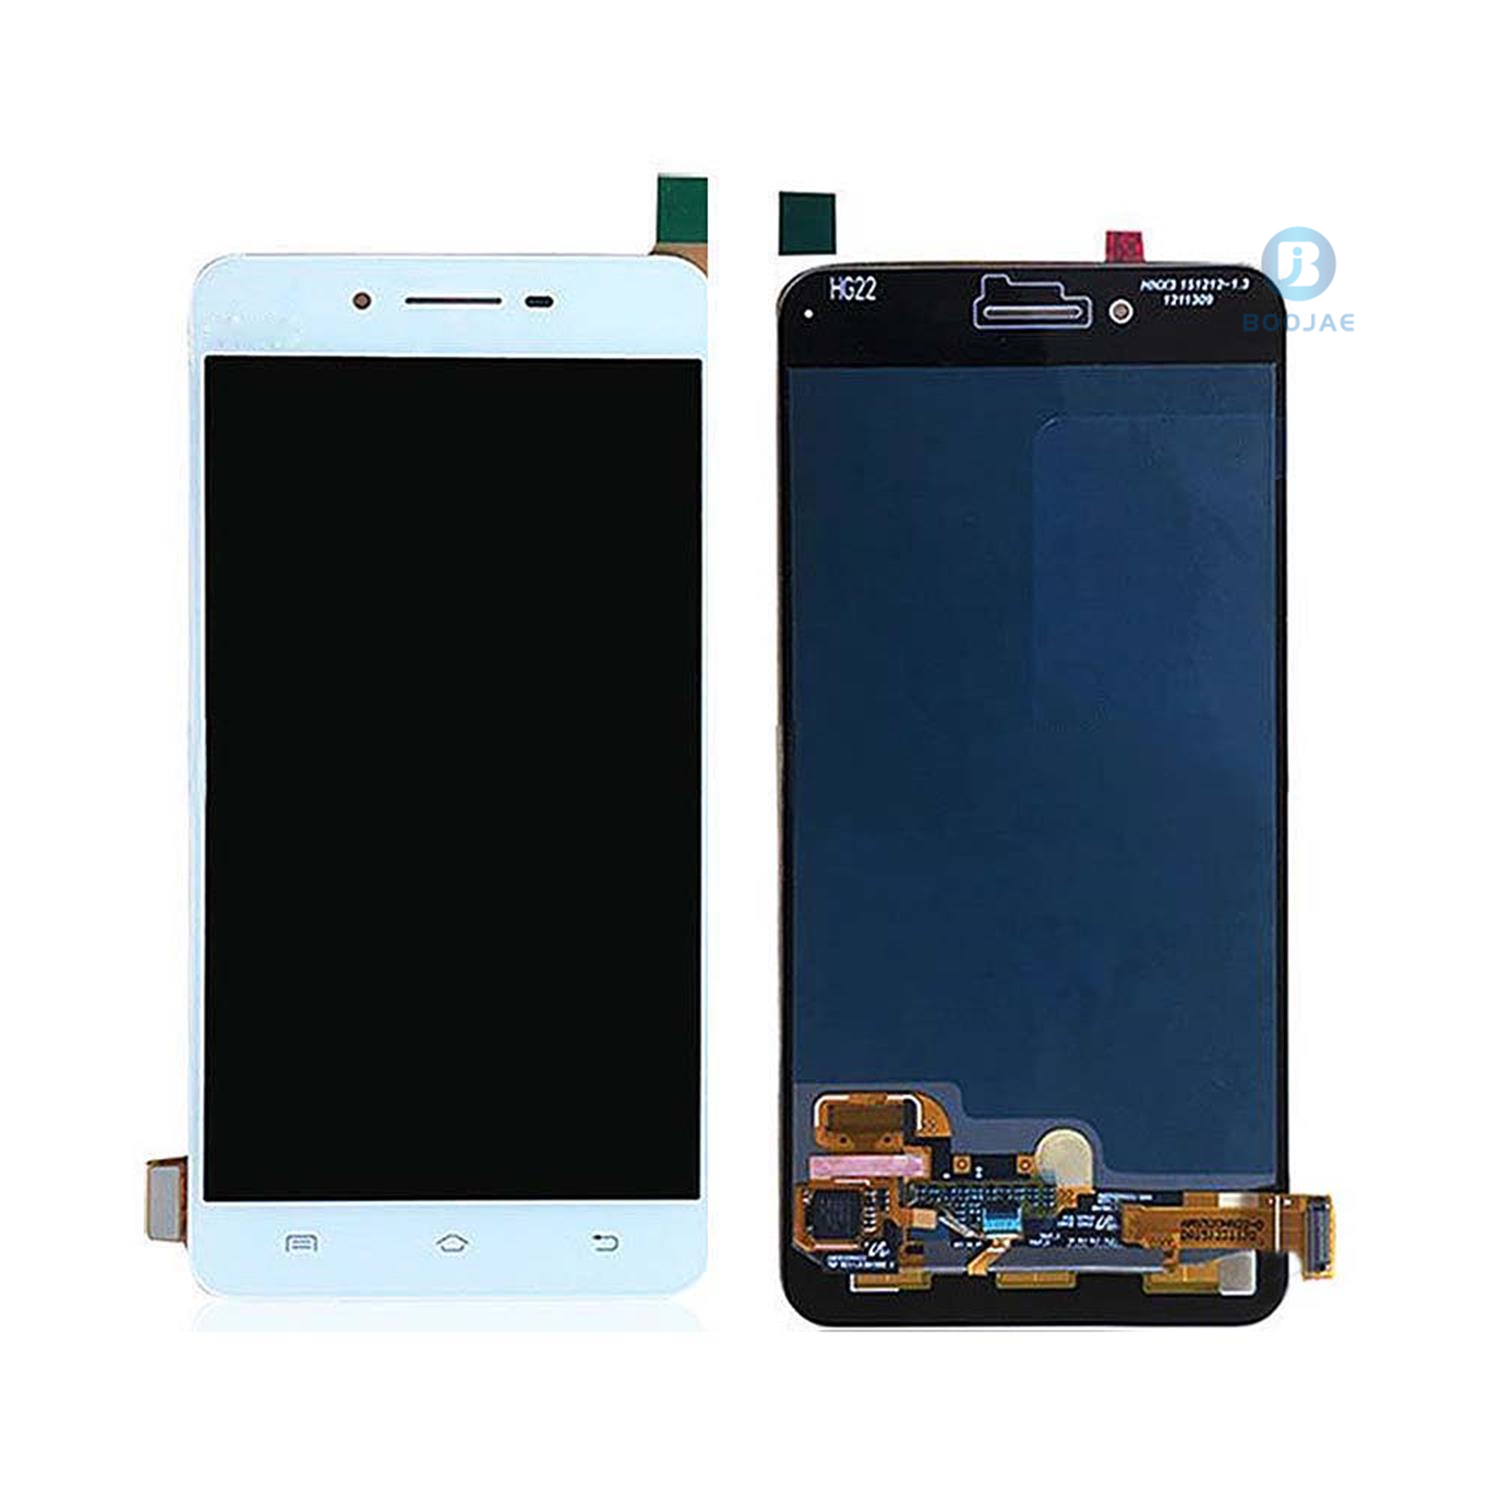 Vivo X6 LCD Screen Display, Lcd Assembly Replacement